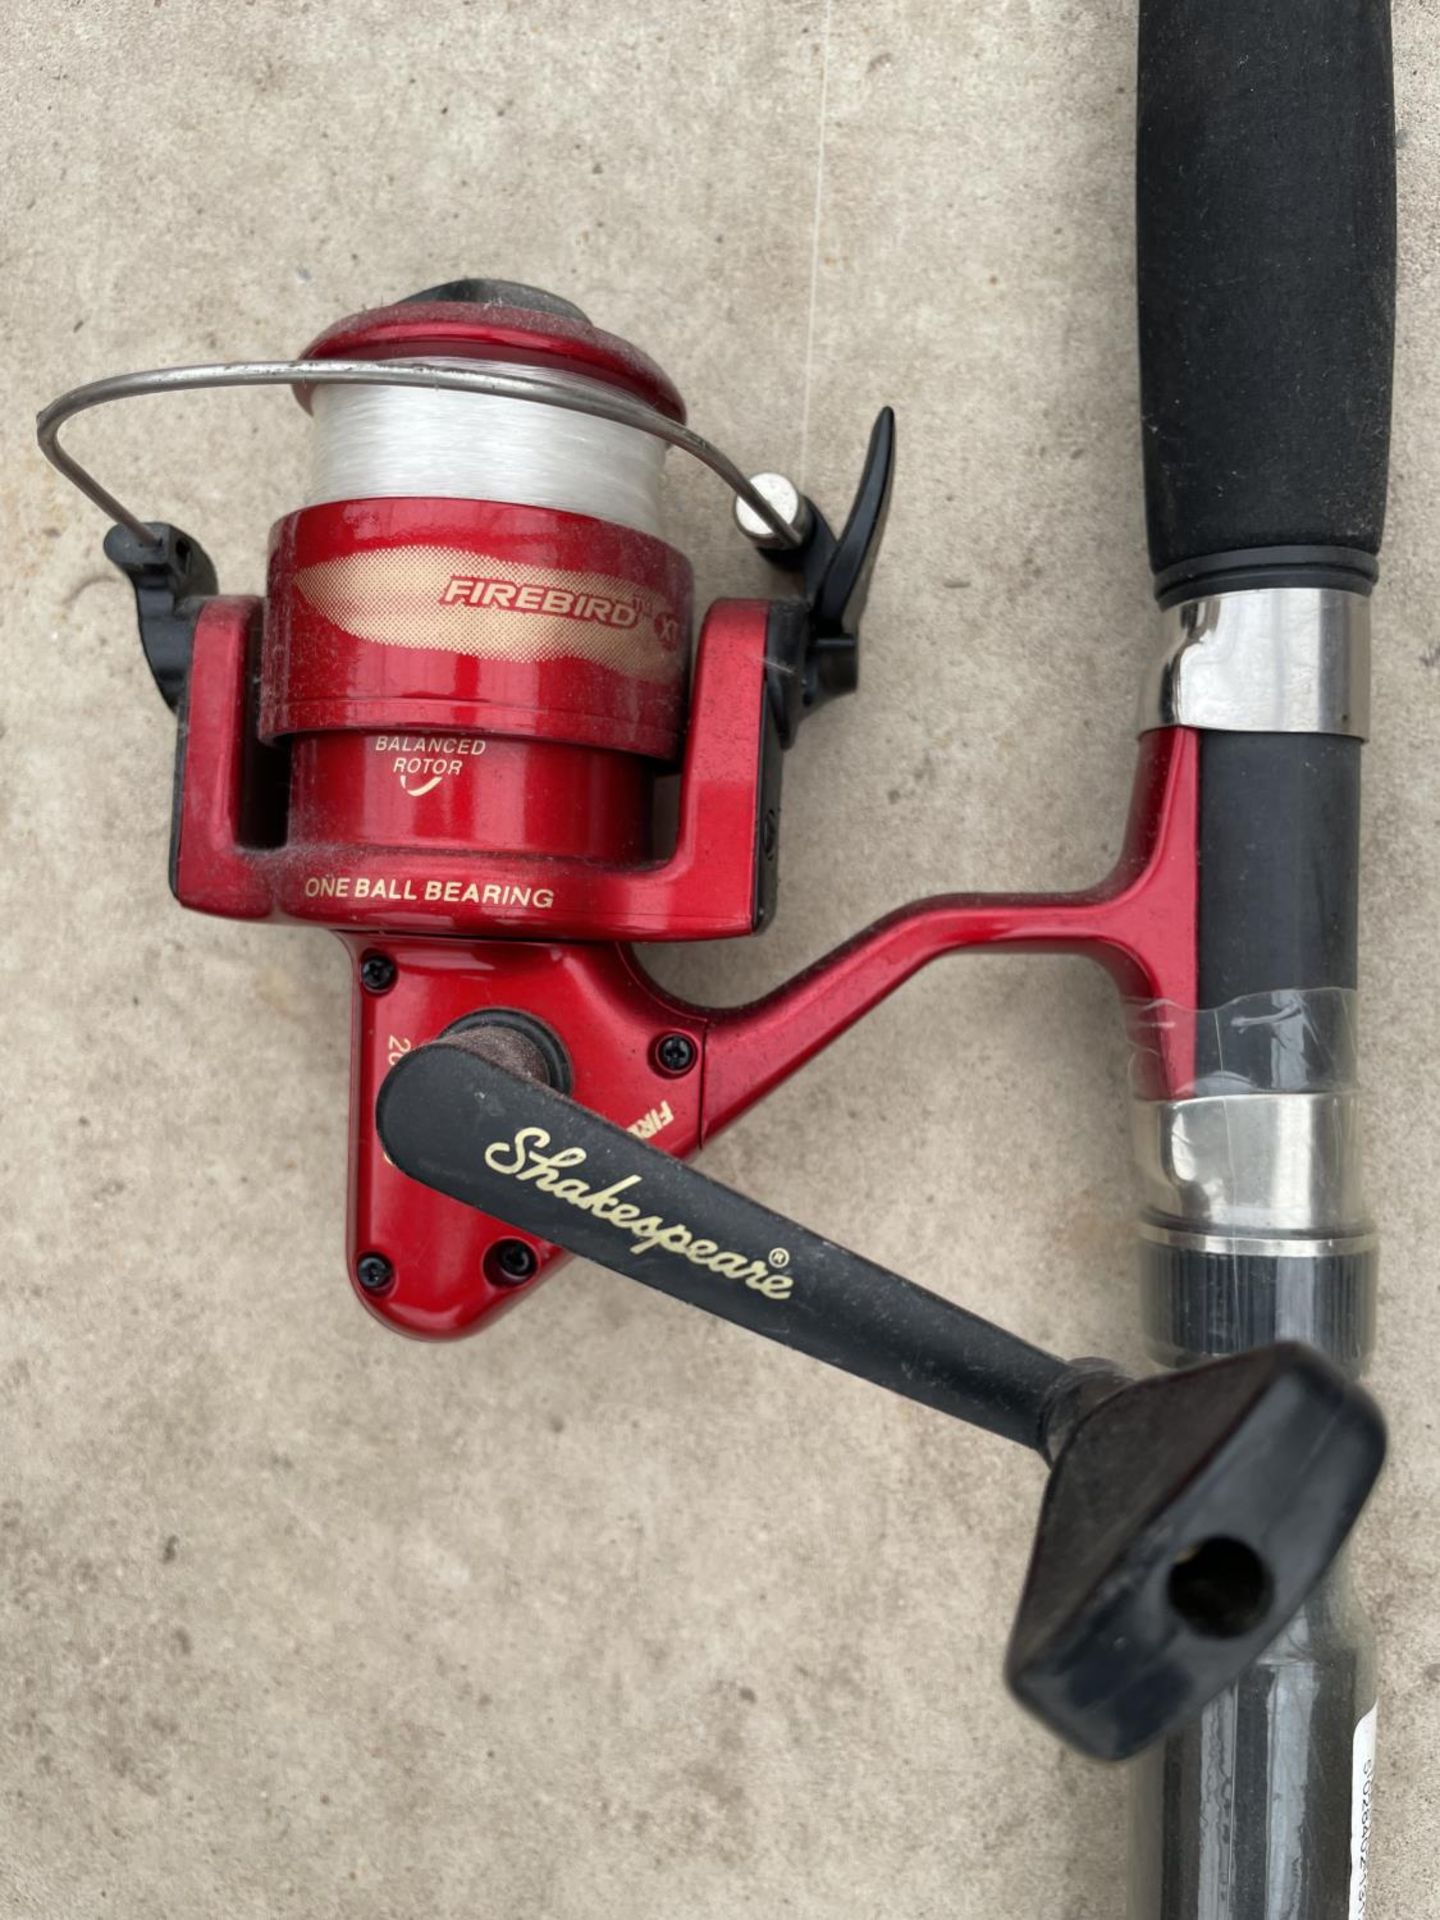 TWO MODERN FISHING RODS, ONE WITH A REEL - Image 2 of 3